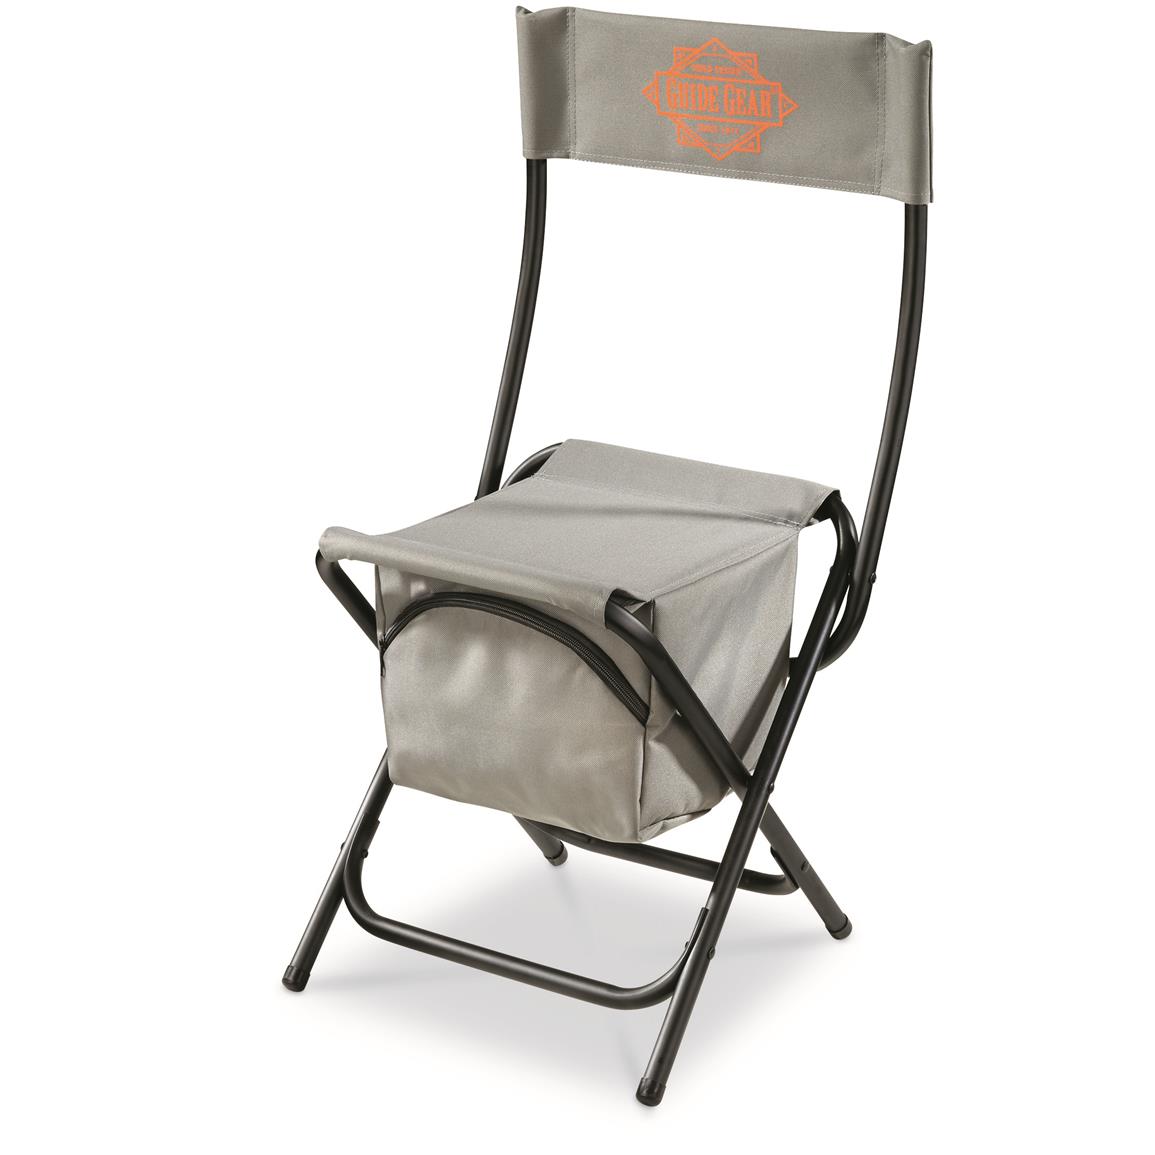 Guide Gear Folding Cooler Ice Fishing Chair 676136, Ice